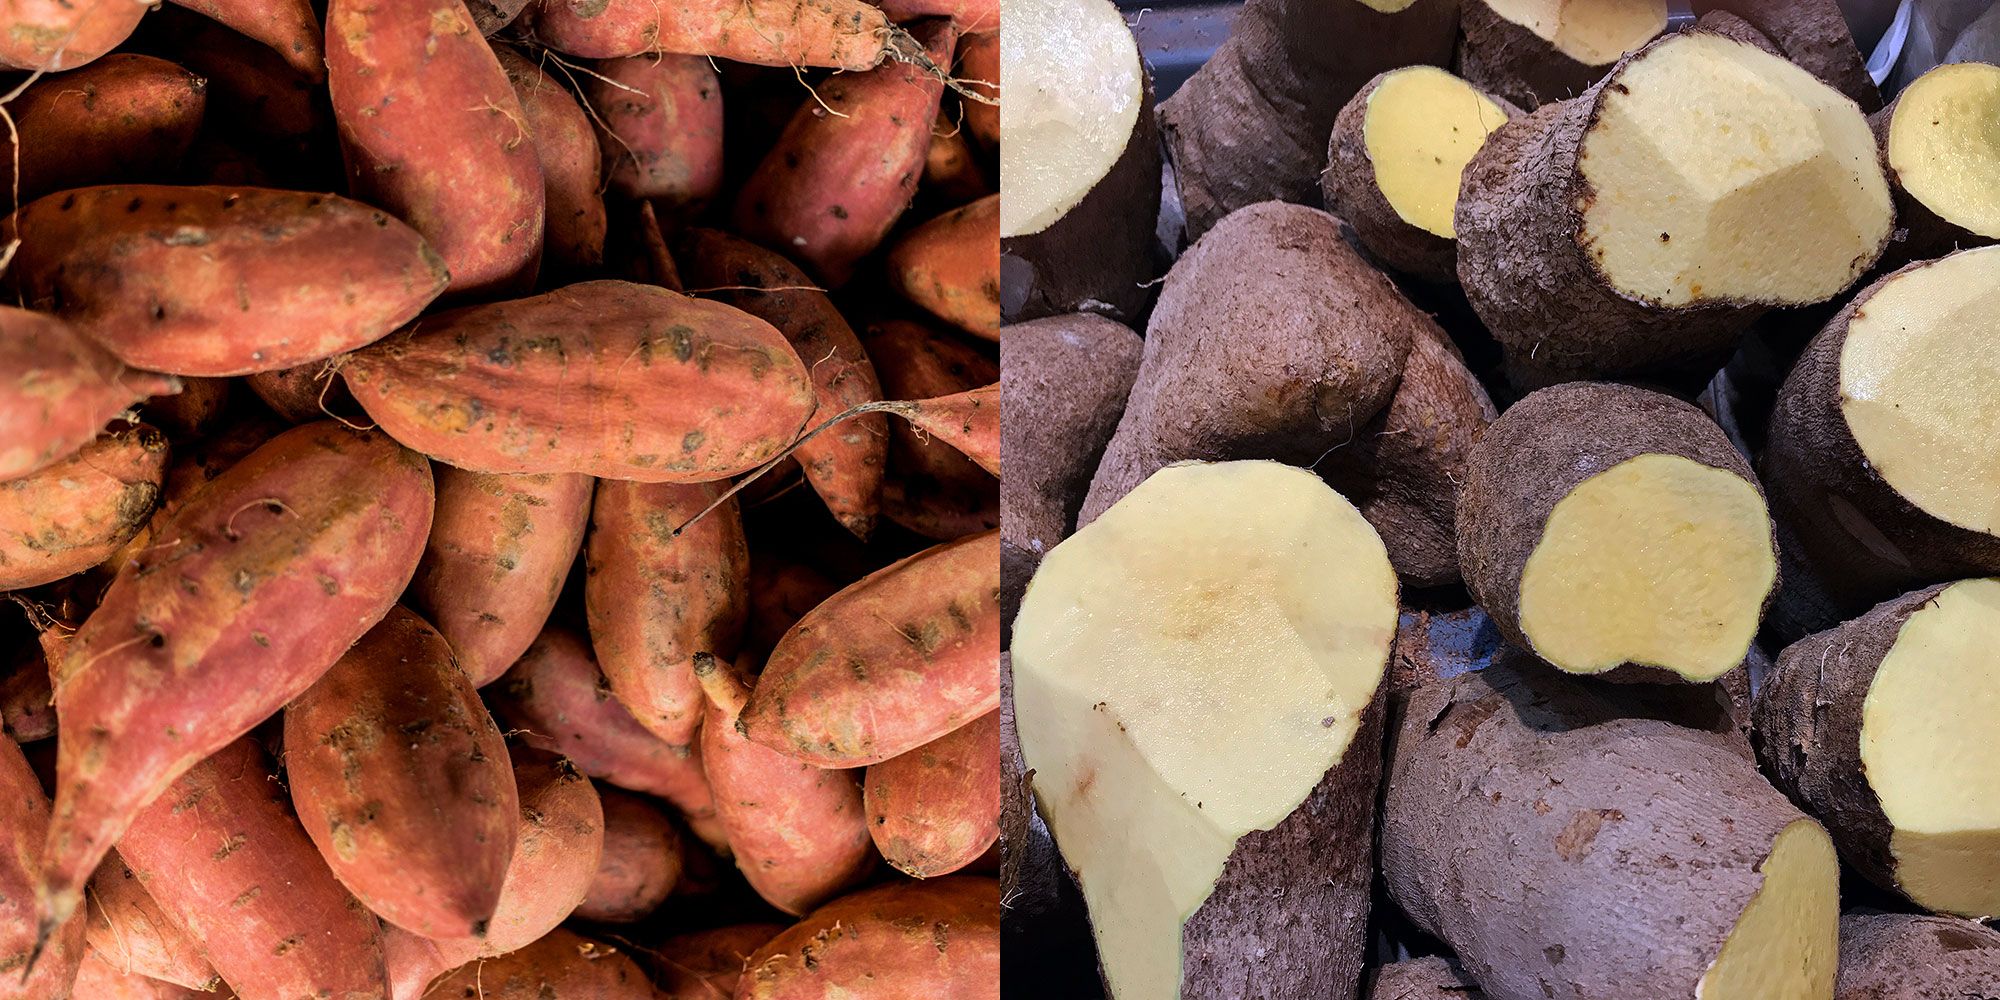 Sweet Potatoes Vs. Yams: What's The Difference?